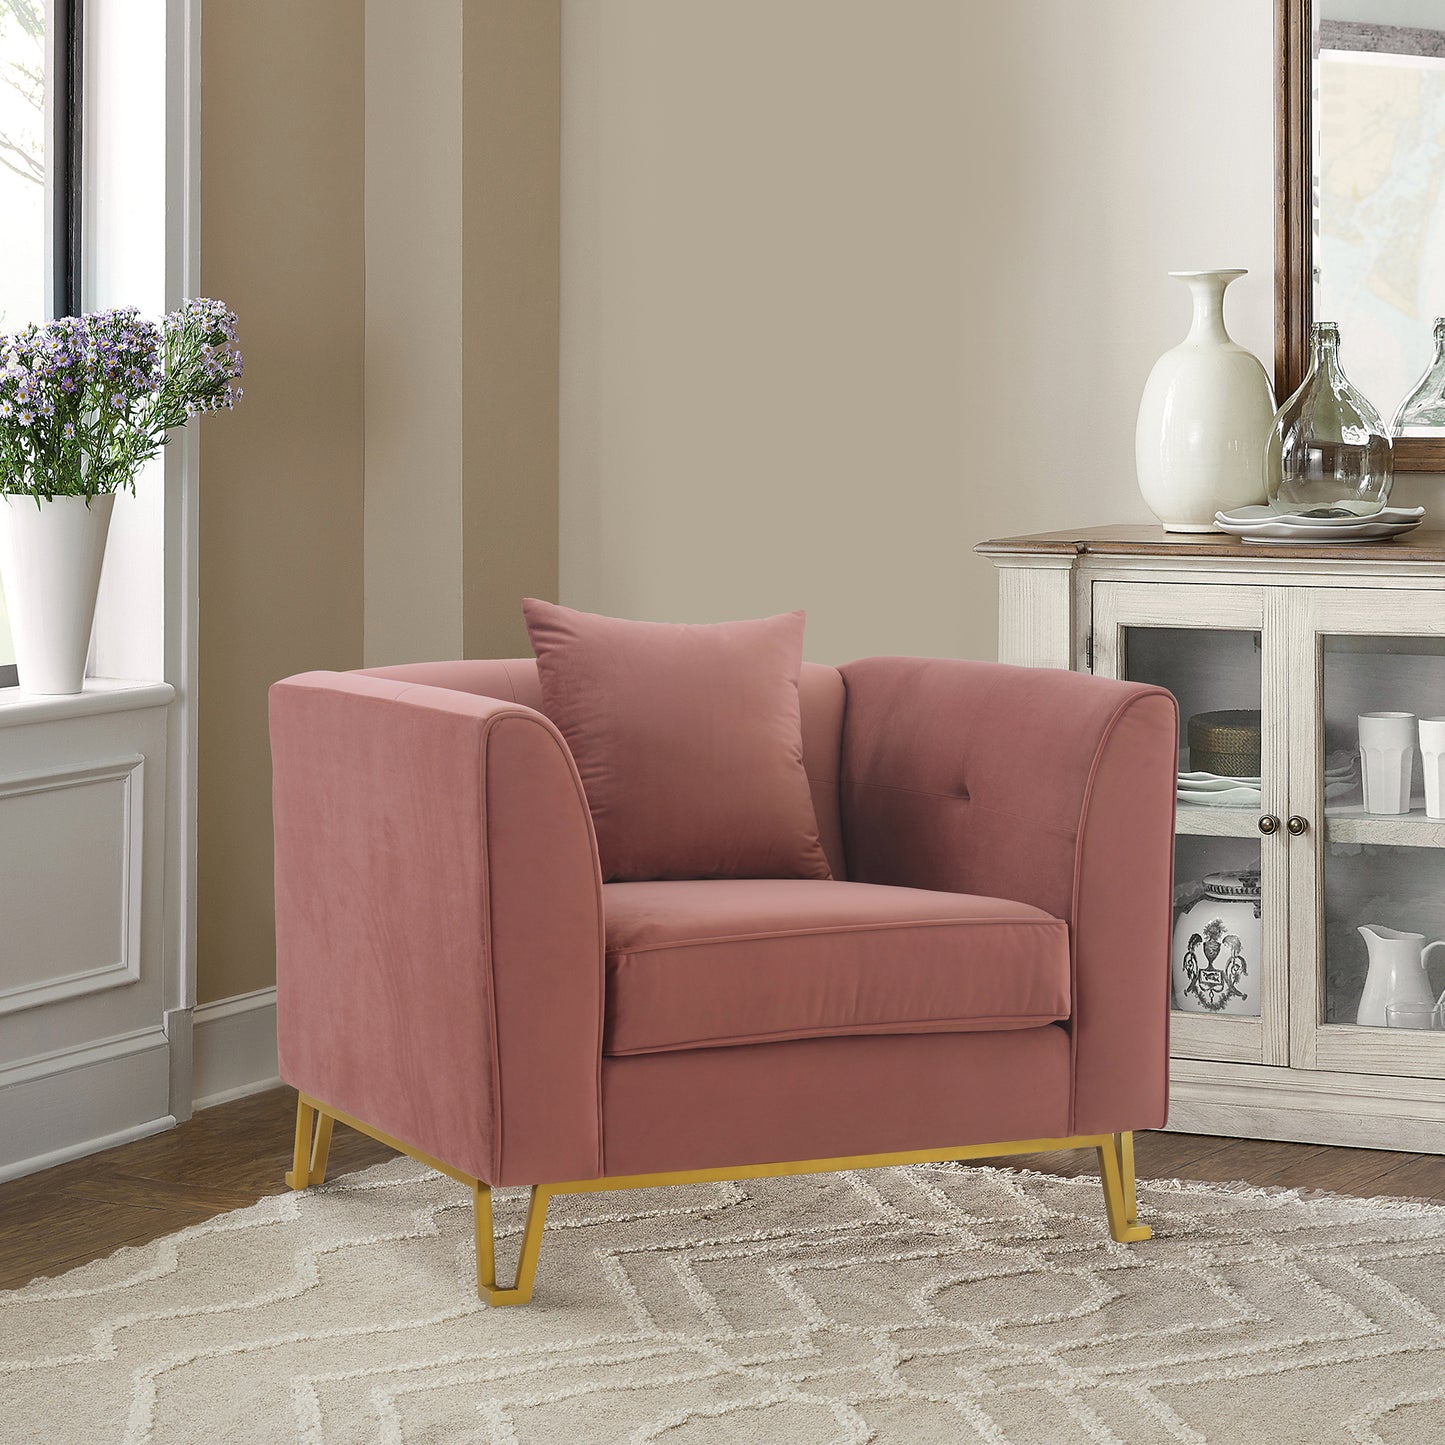 Everest Blush Fabric Upholstered Sofa Accent Chair with Brushed Gold Legs